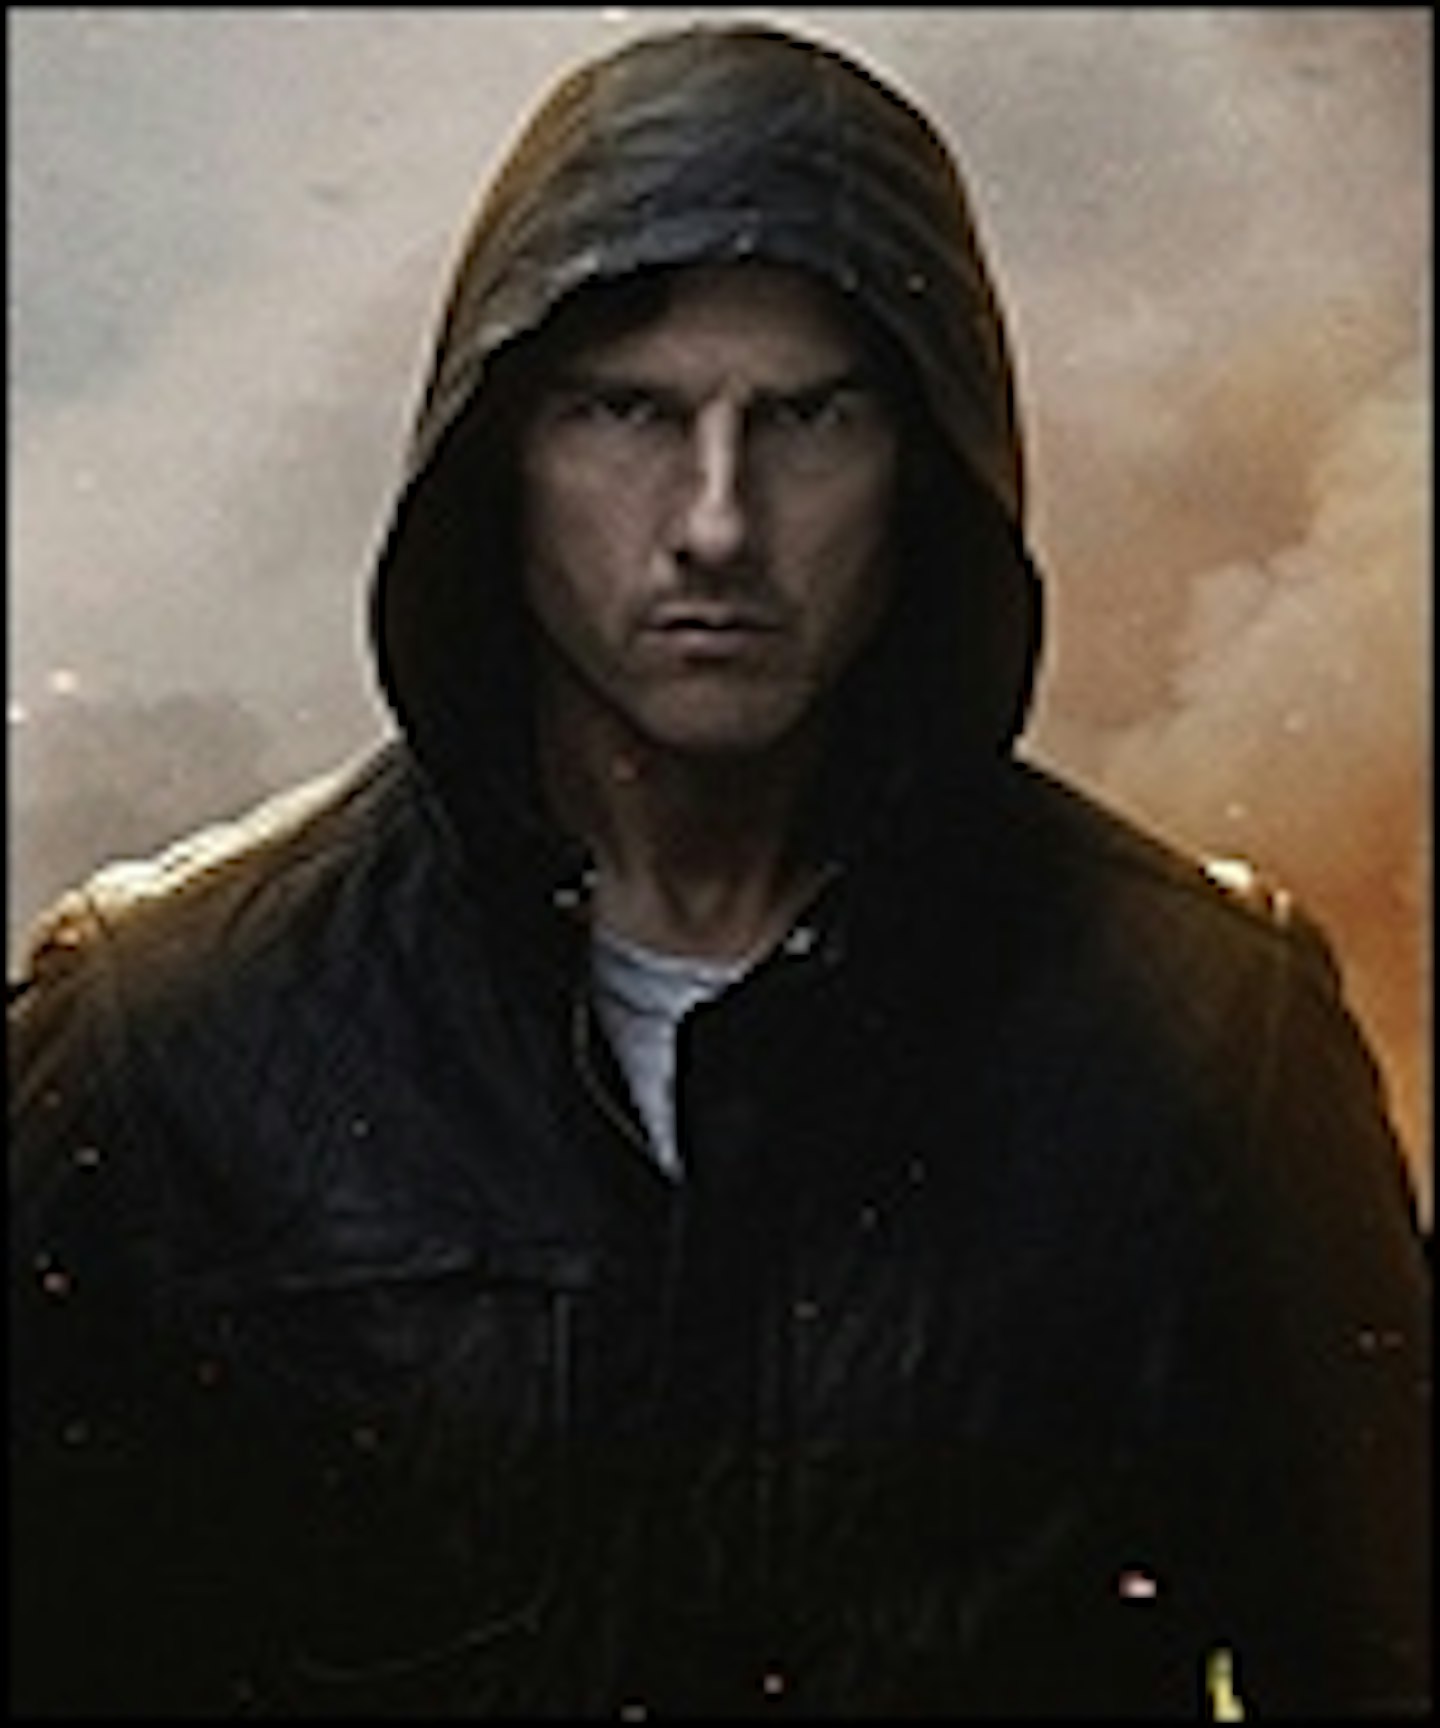 New Ghost Protocol Image Released